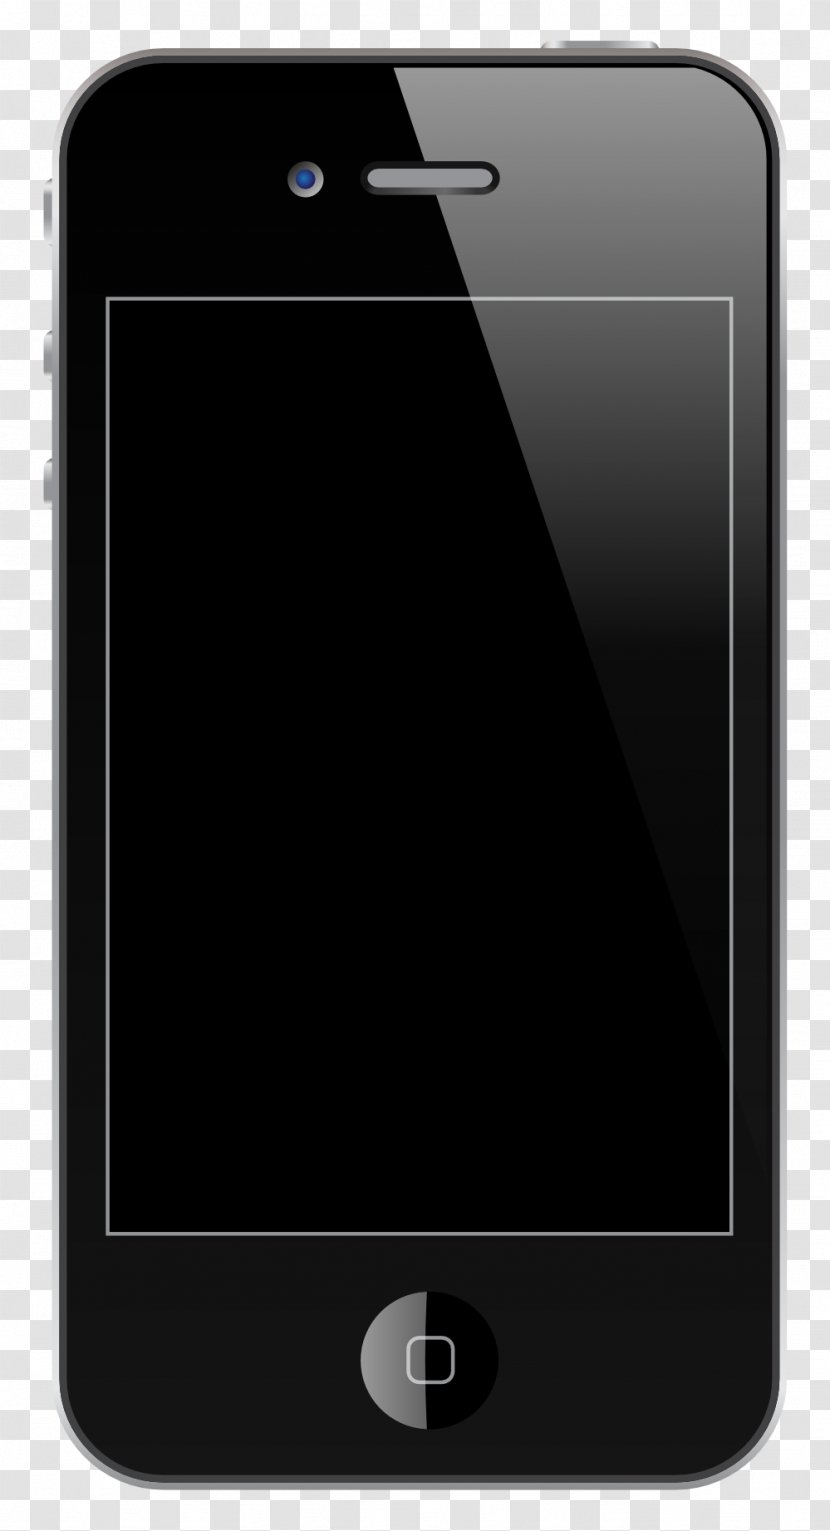 IPhone 4S 5 6 3GS - Iphone 3gs - Mobile Transparent PNG